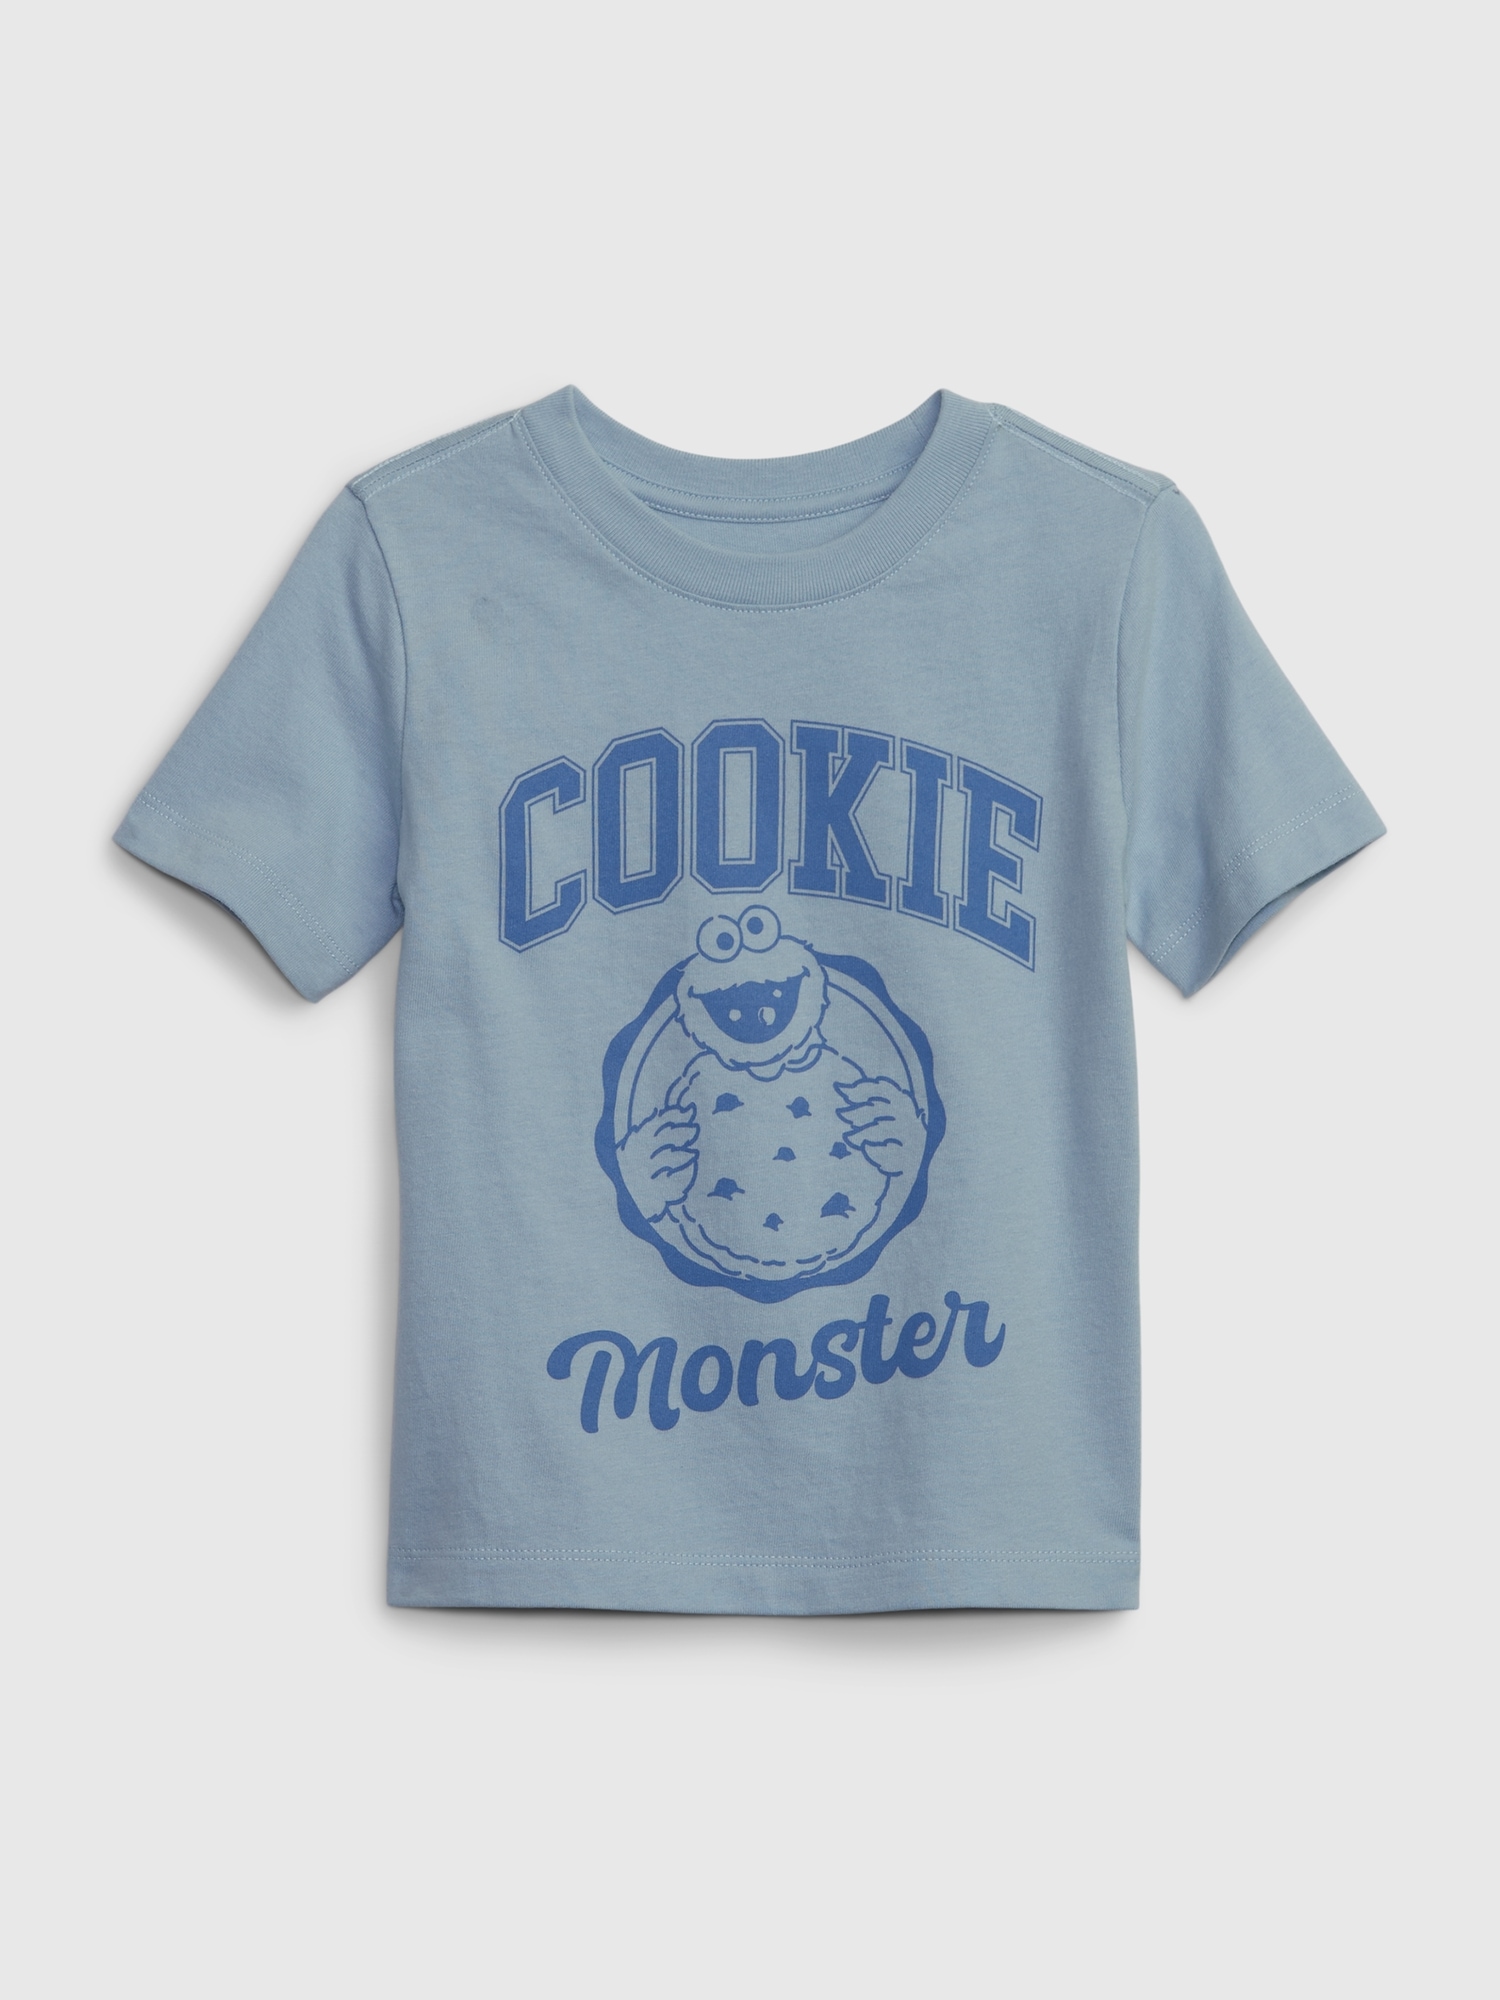 Sesame Street Kids Clothing in Kids Clothing Character Shop 